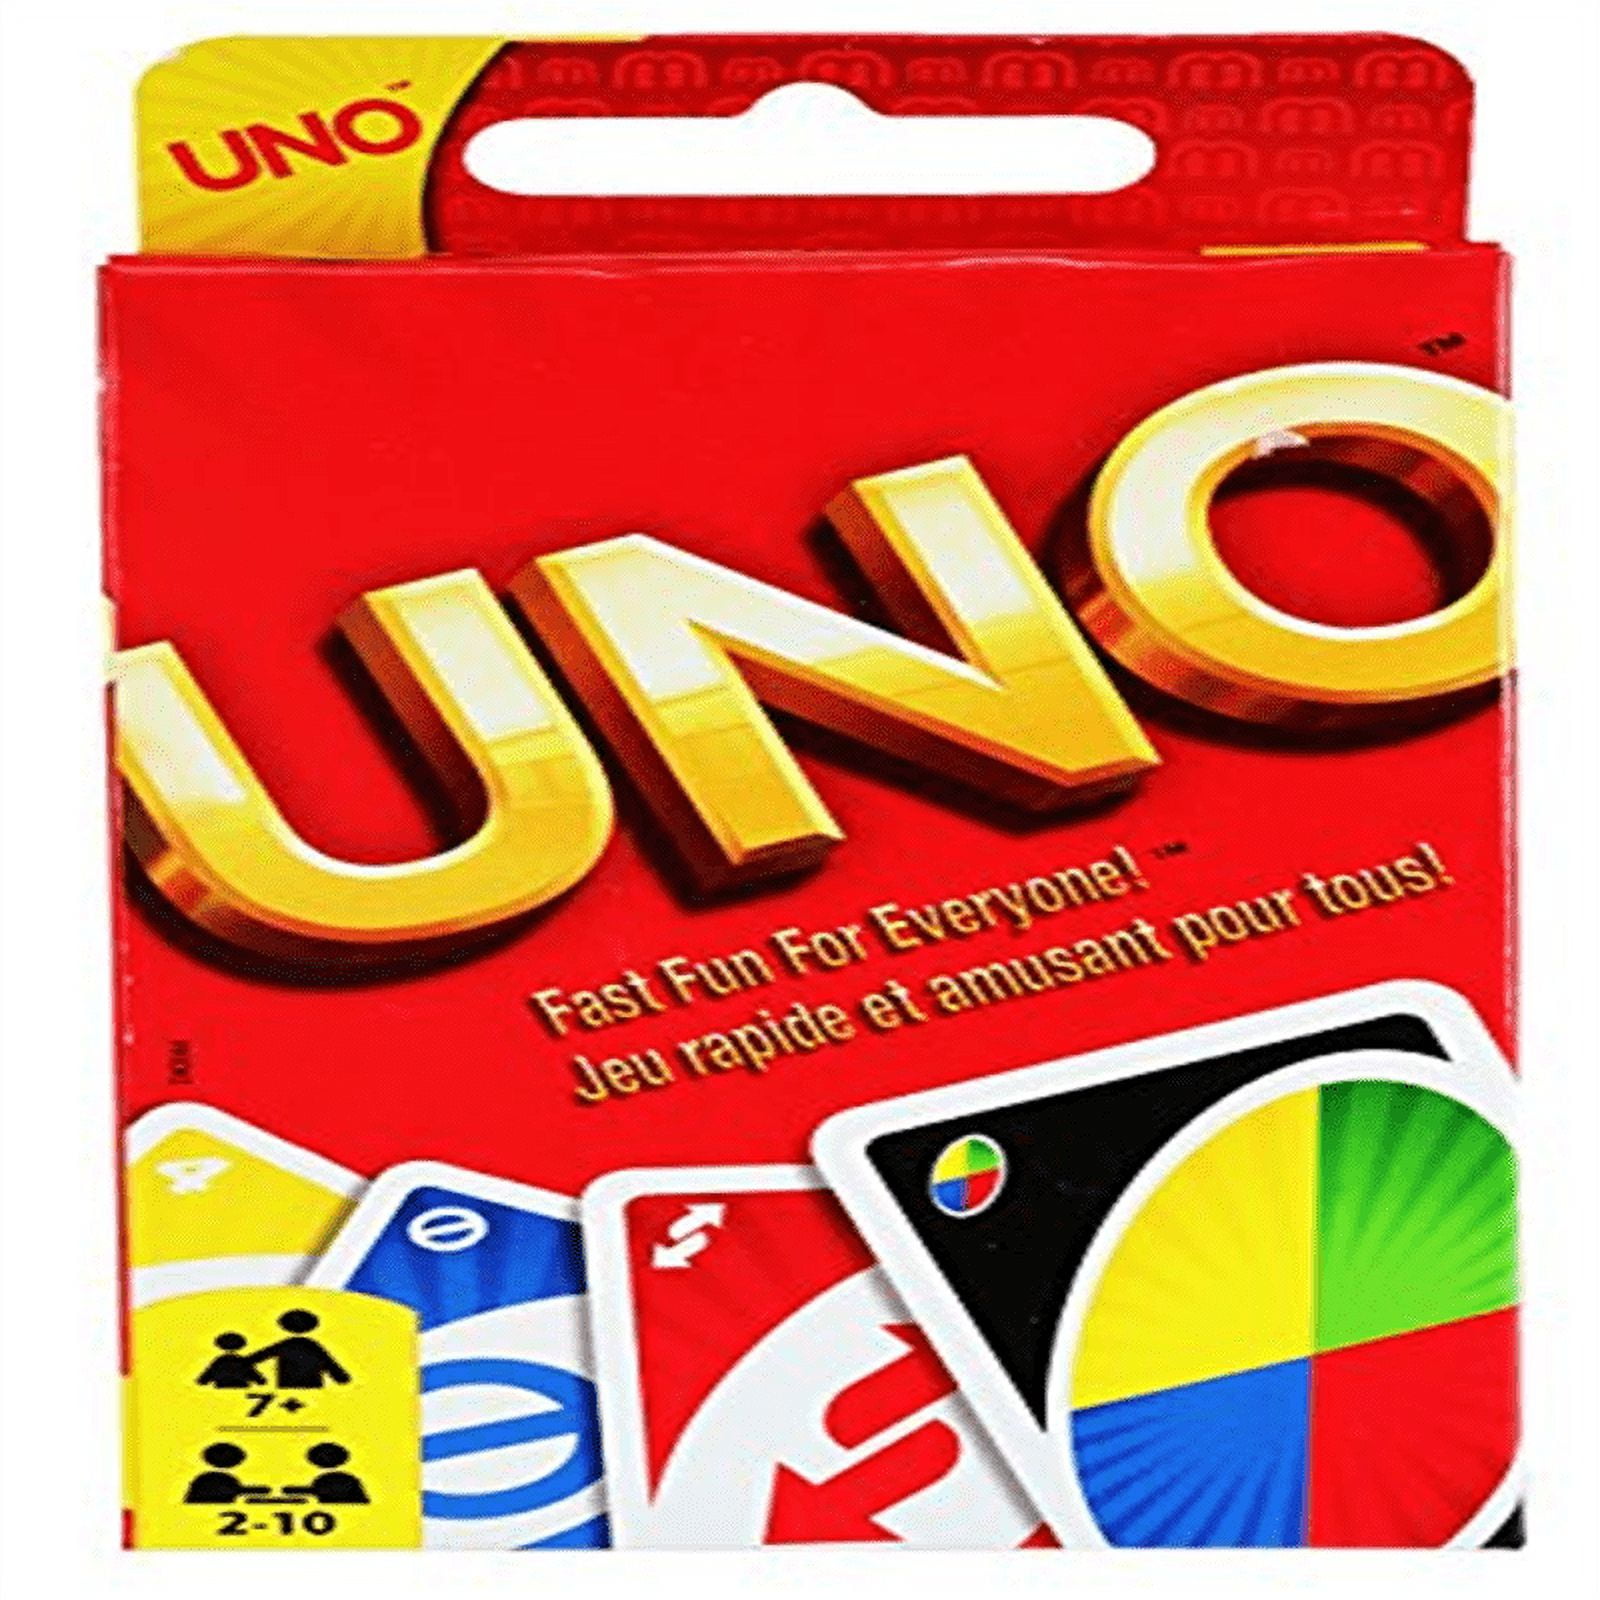 These mini Uno cards look like regular sized cards in my newborn